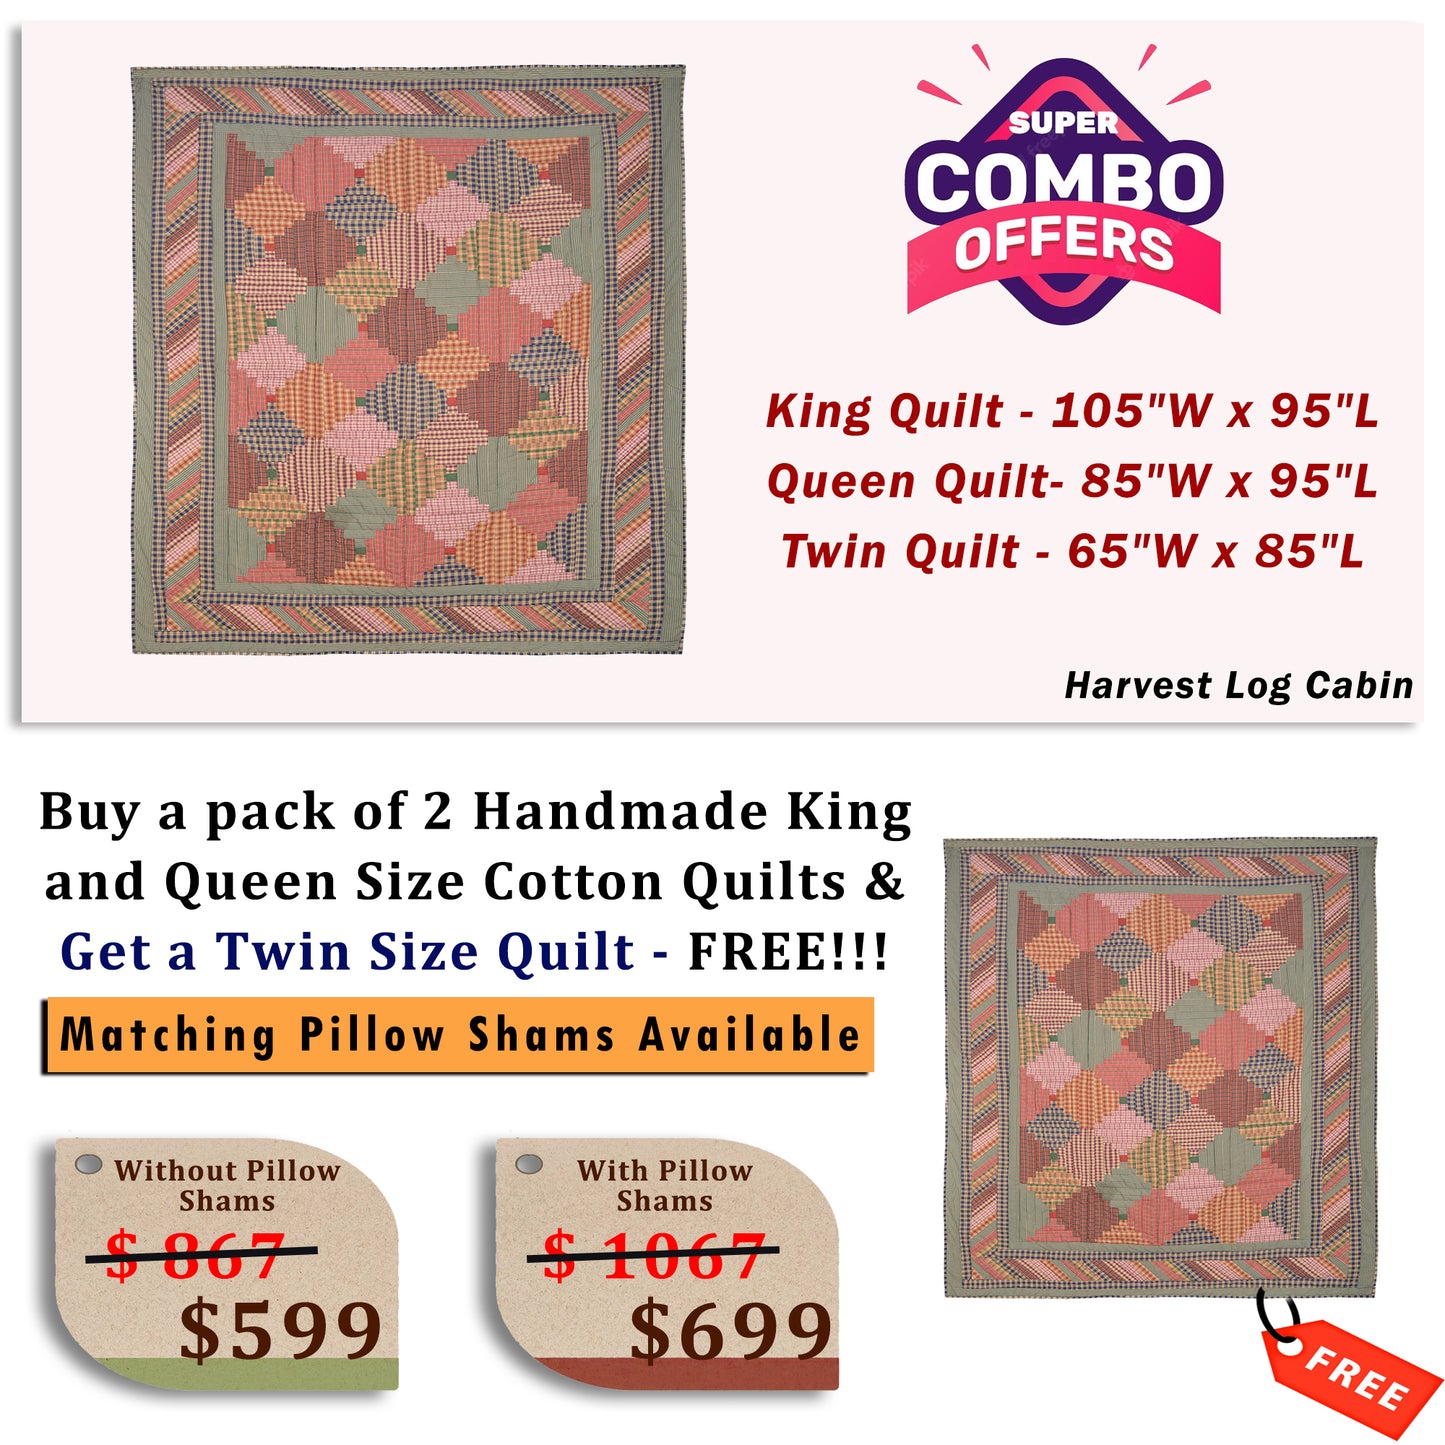 Harvest Log Cabin - Buy a pack of King and Queen Size Quilt, and get a Twin Size Quilt FREE!!!